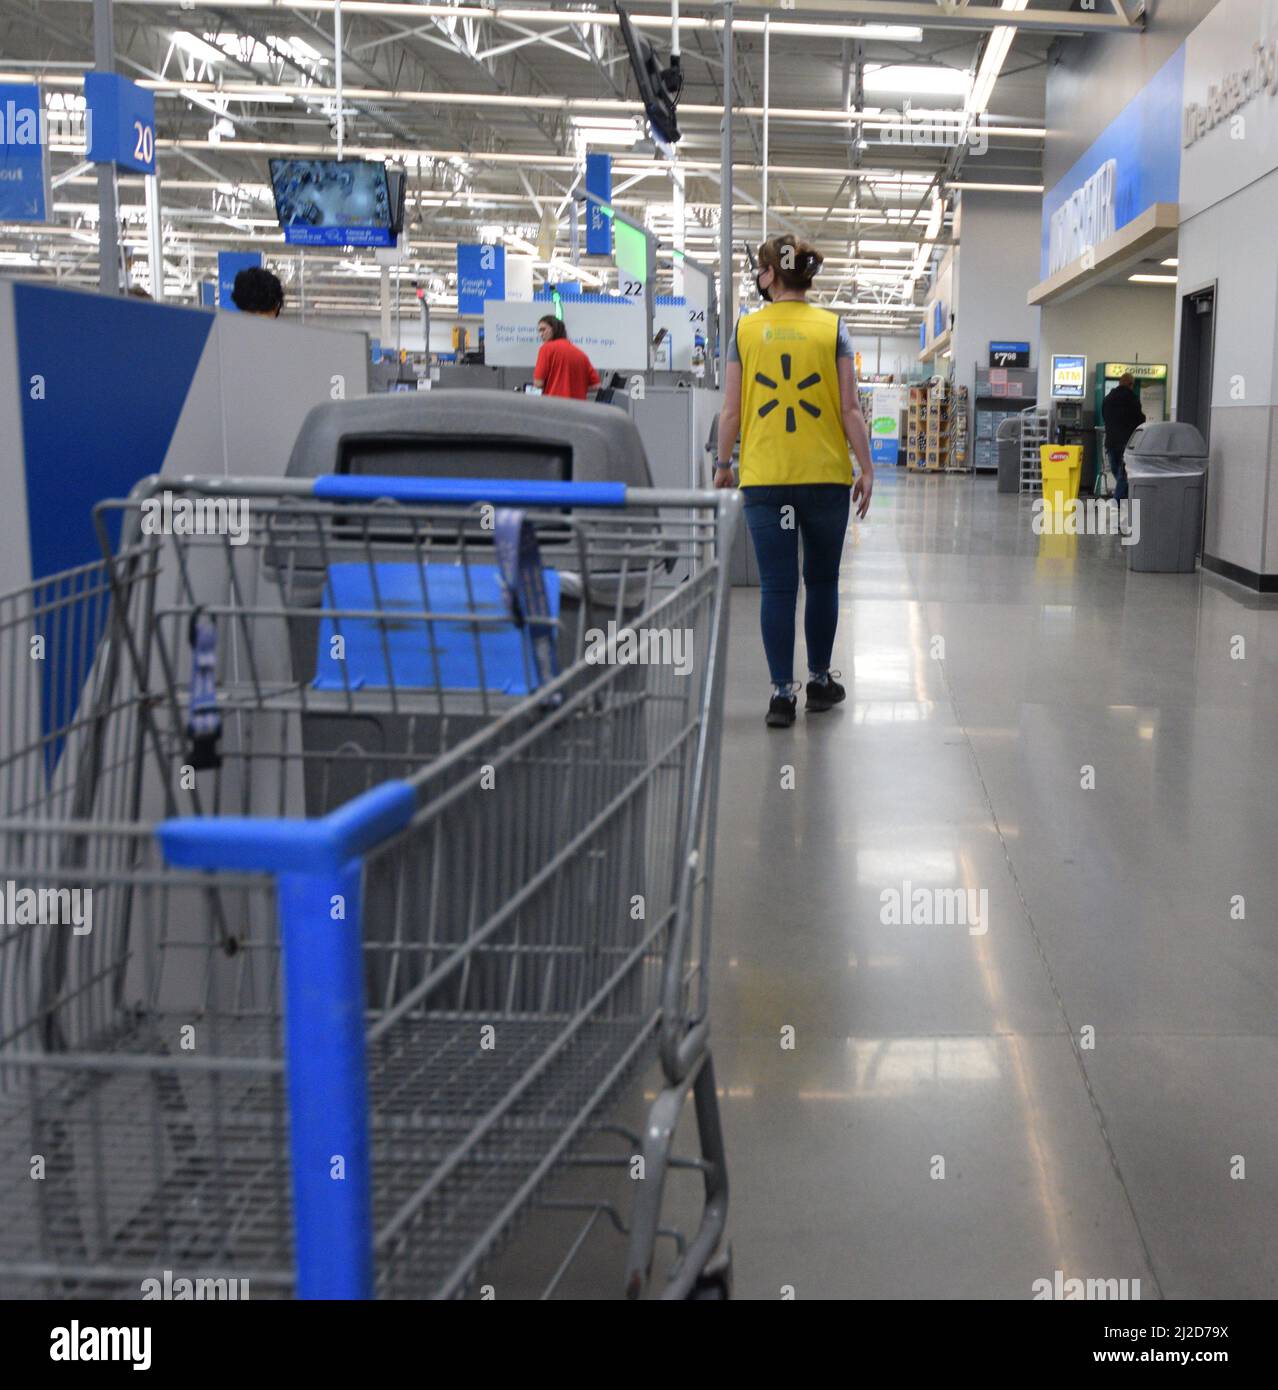 A worker inside a Walmart store in Cheyenne Wyoming - August 2021 Stock Photo